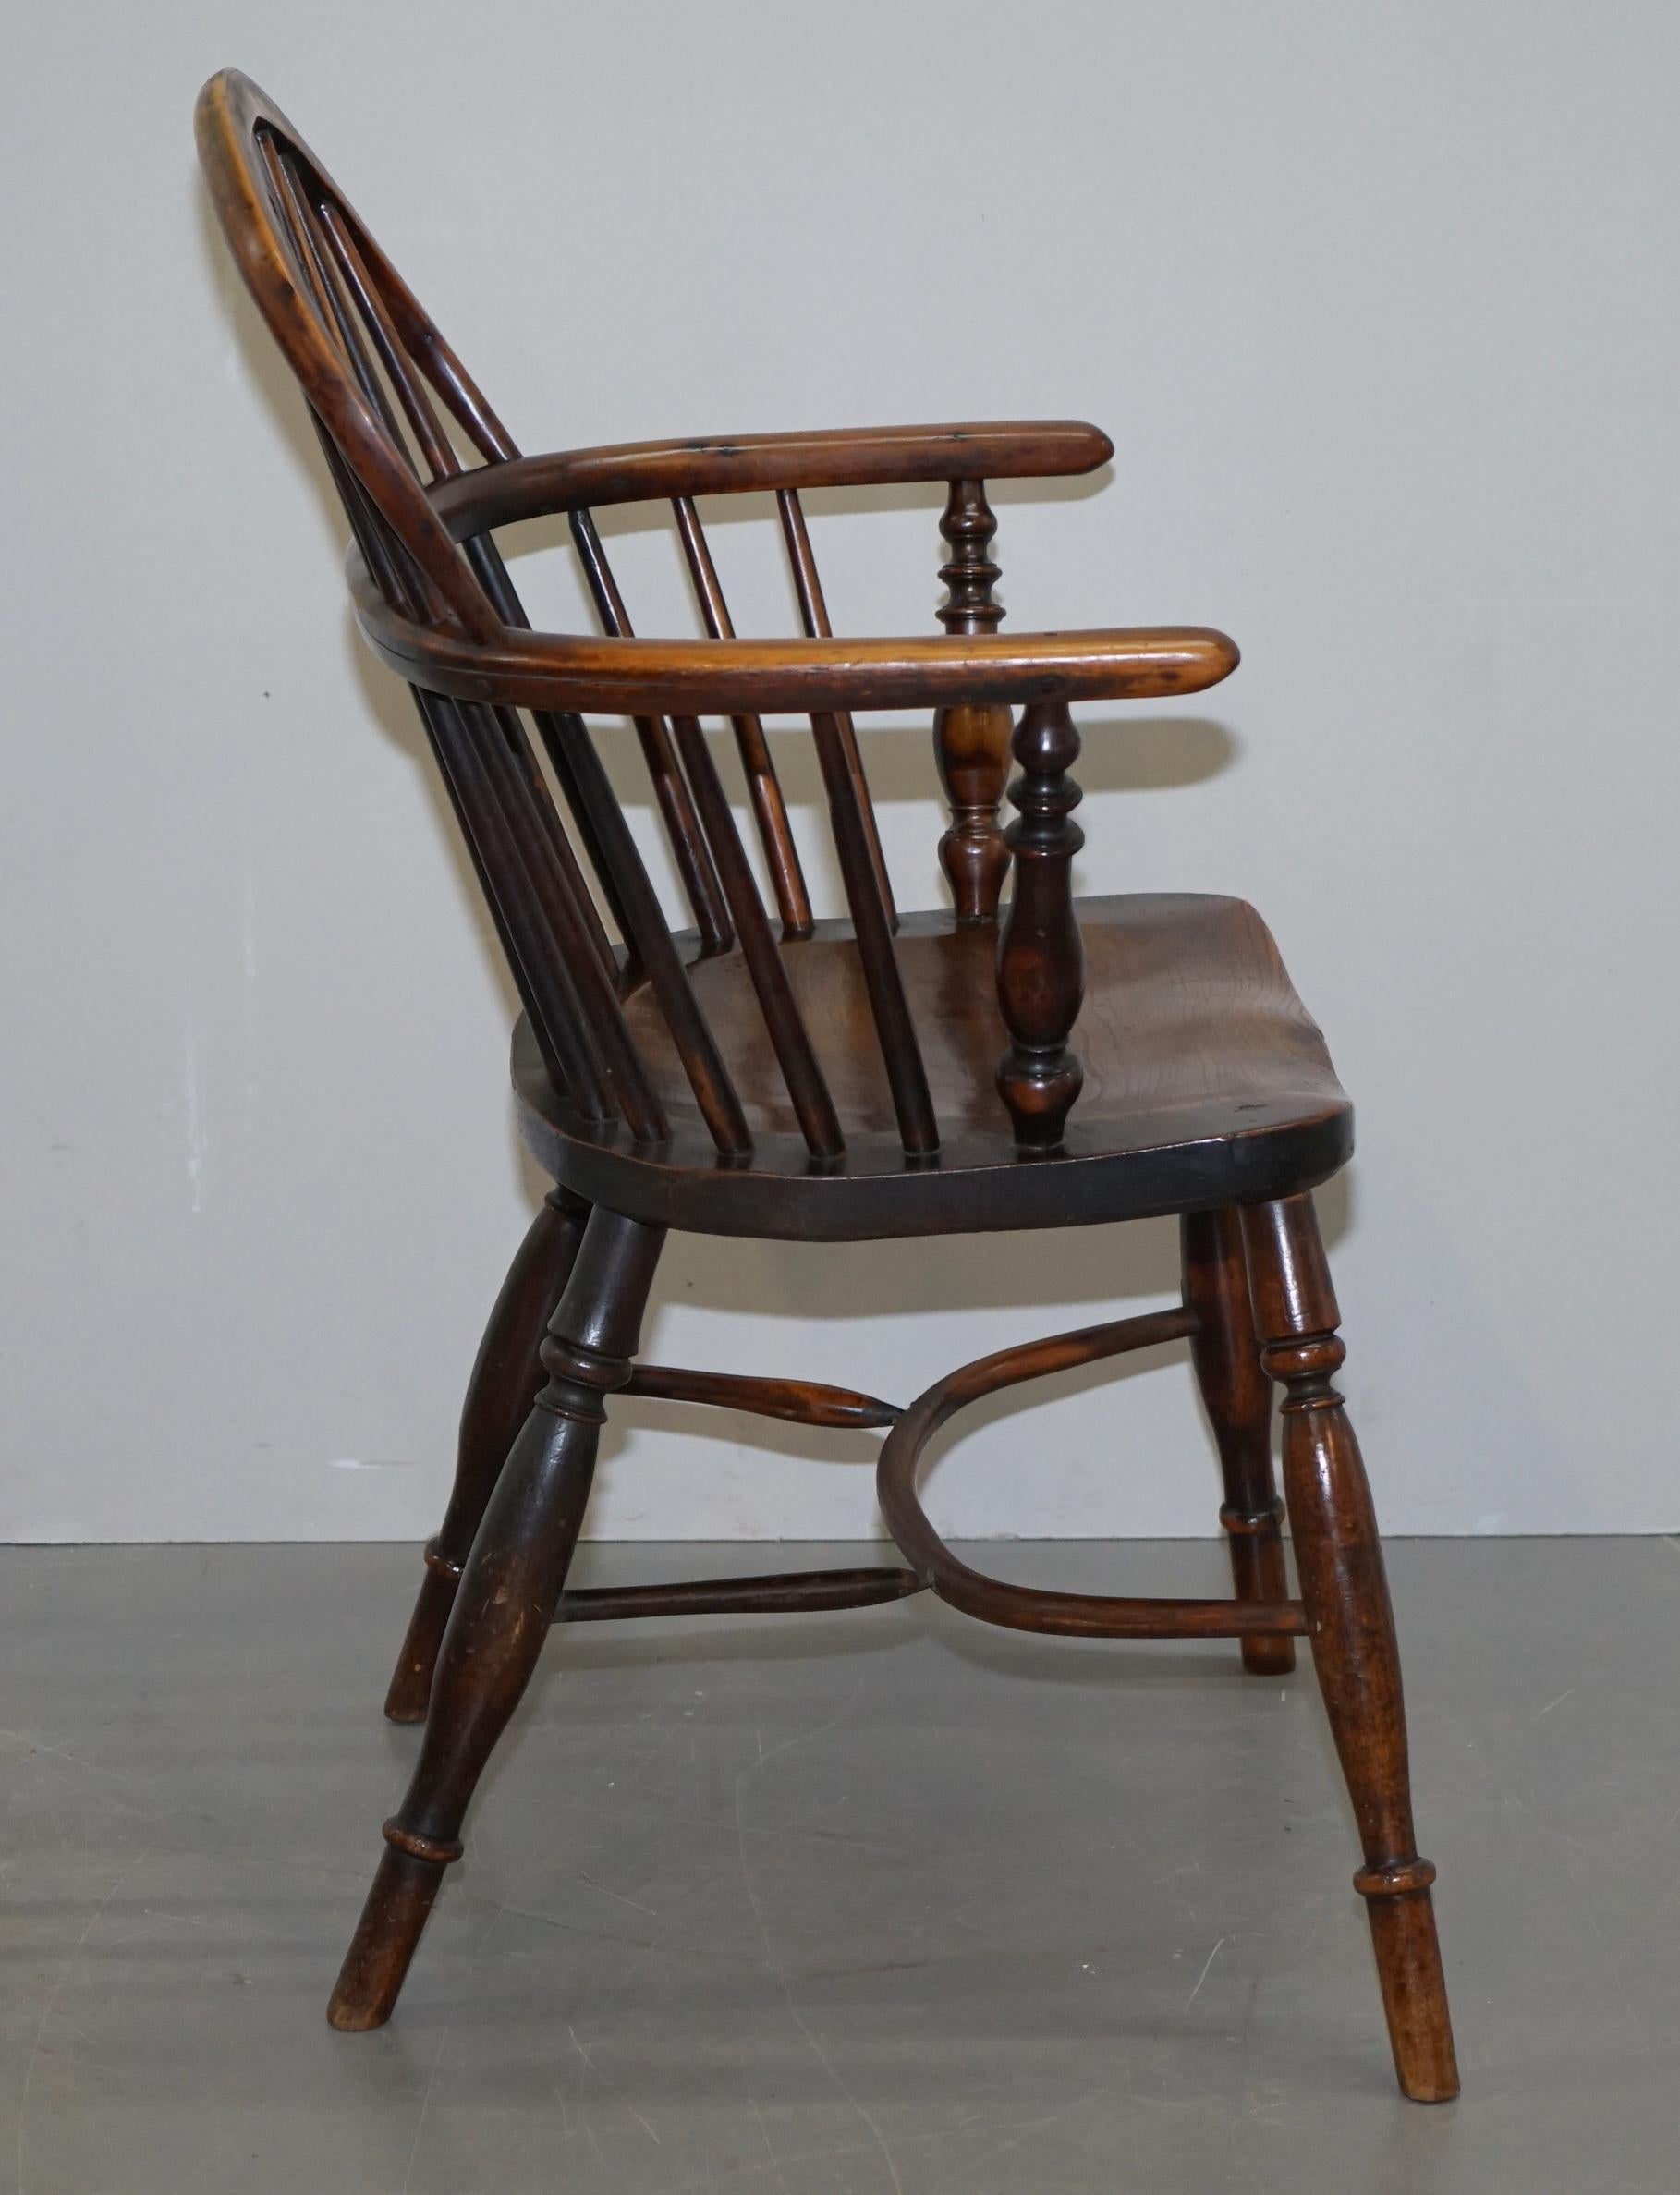 1 of 6 Burr Yew Wood and Elm Windsor Armchairs circa 1860 English Country House 13